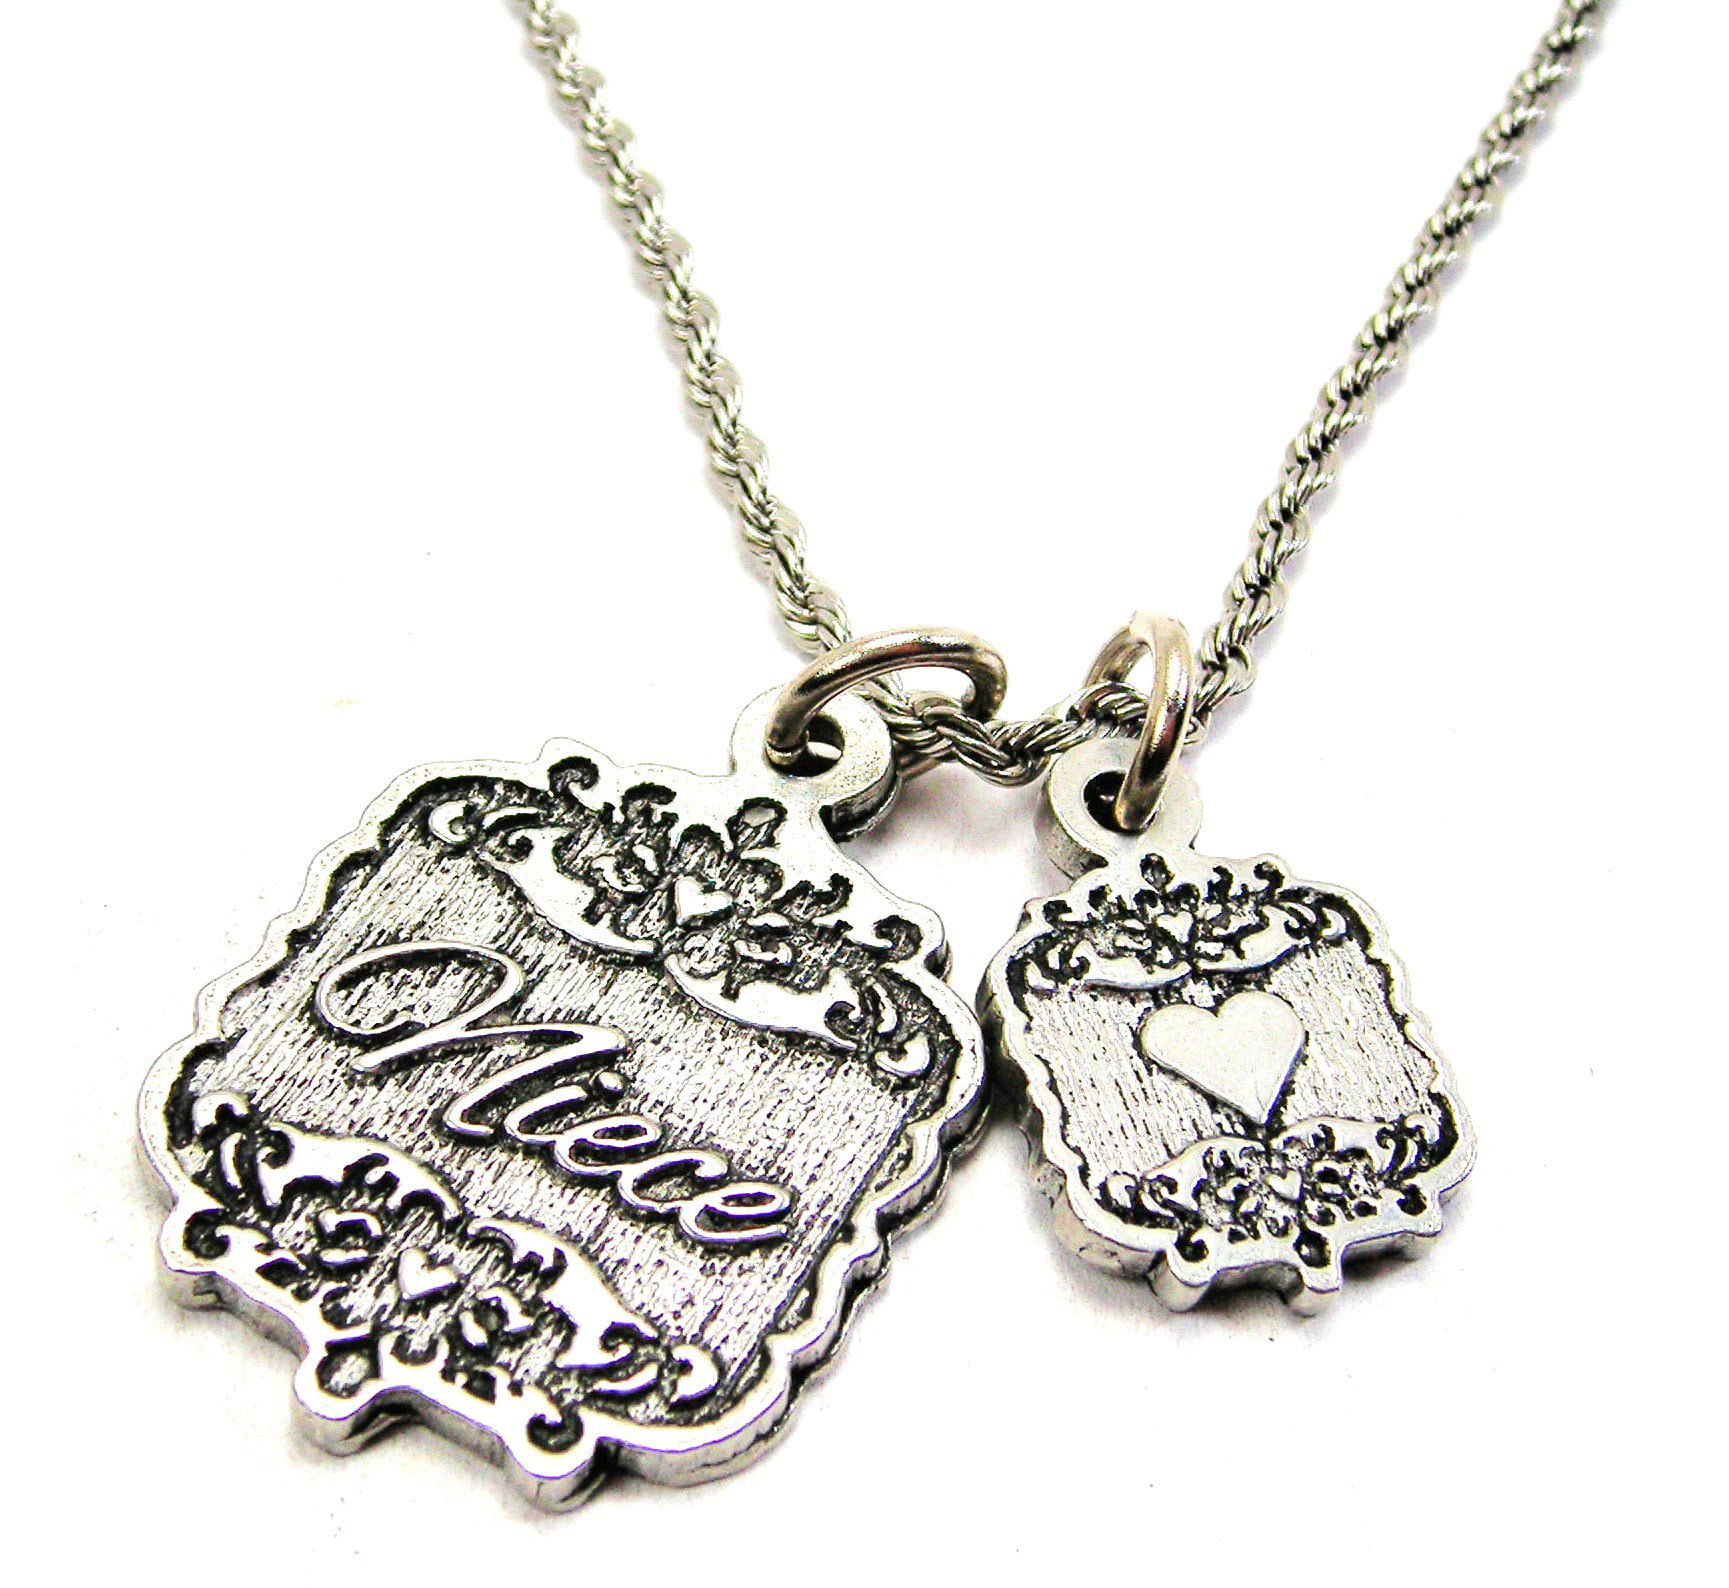 Chubby Chico Charms Sister Victorian Scroll on a 20 Stainless Steel Rope Chain Necklace 